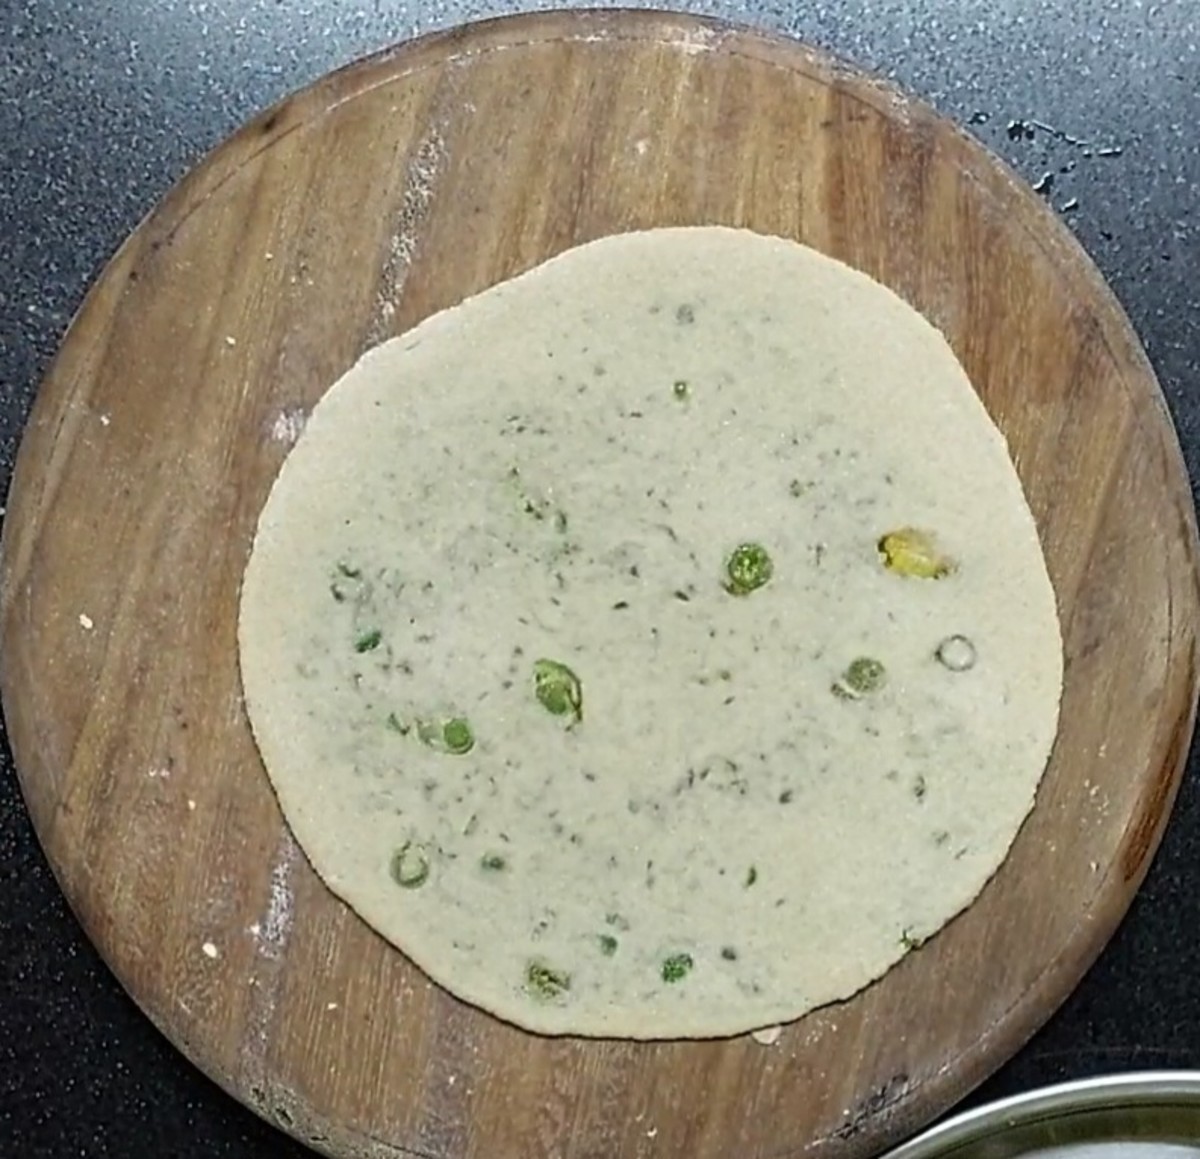 Sprinkle wheat flour and roll into medium thick paratha. Dust off excess flour if any.